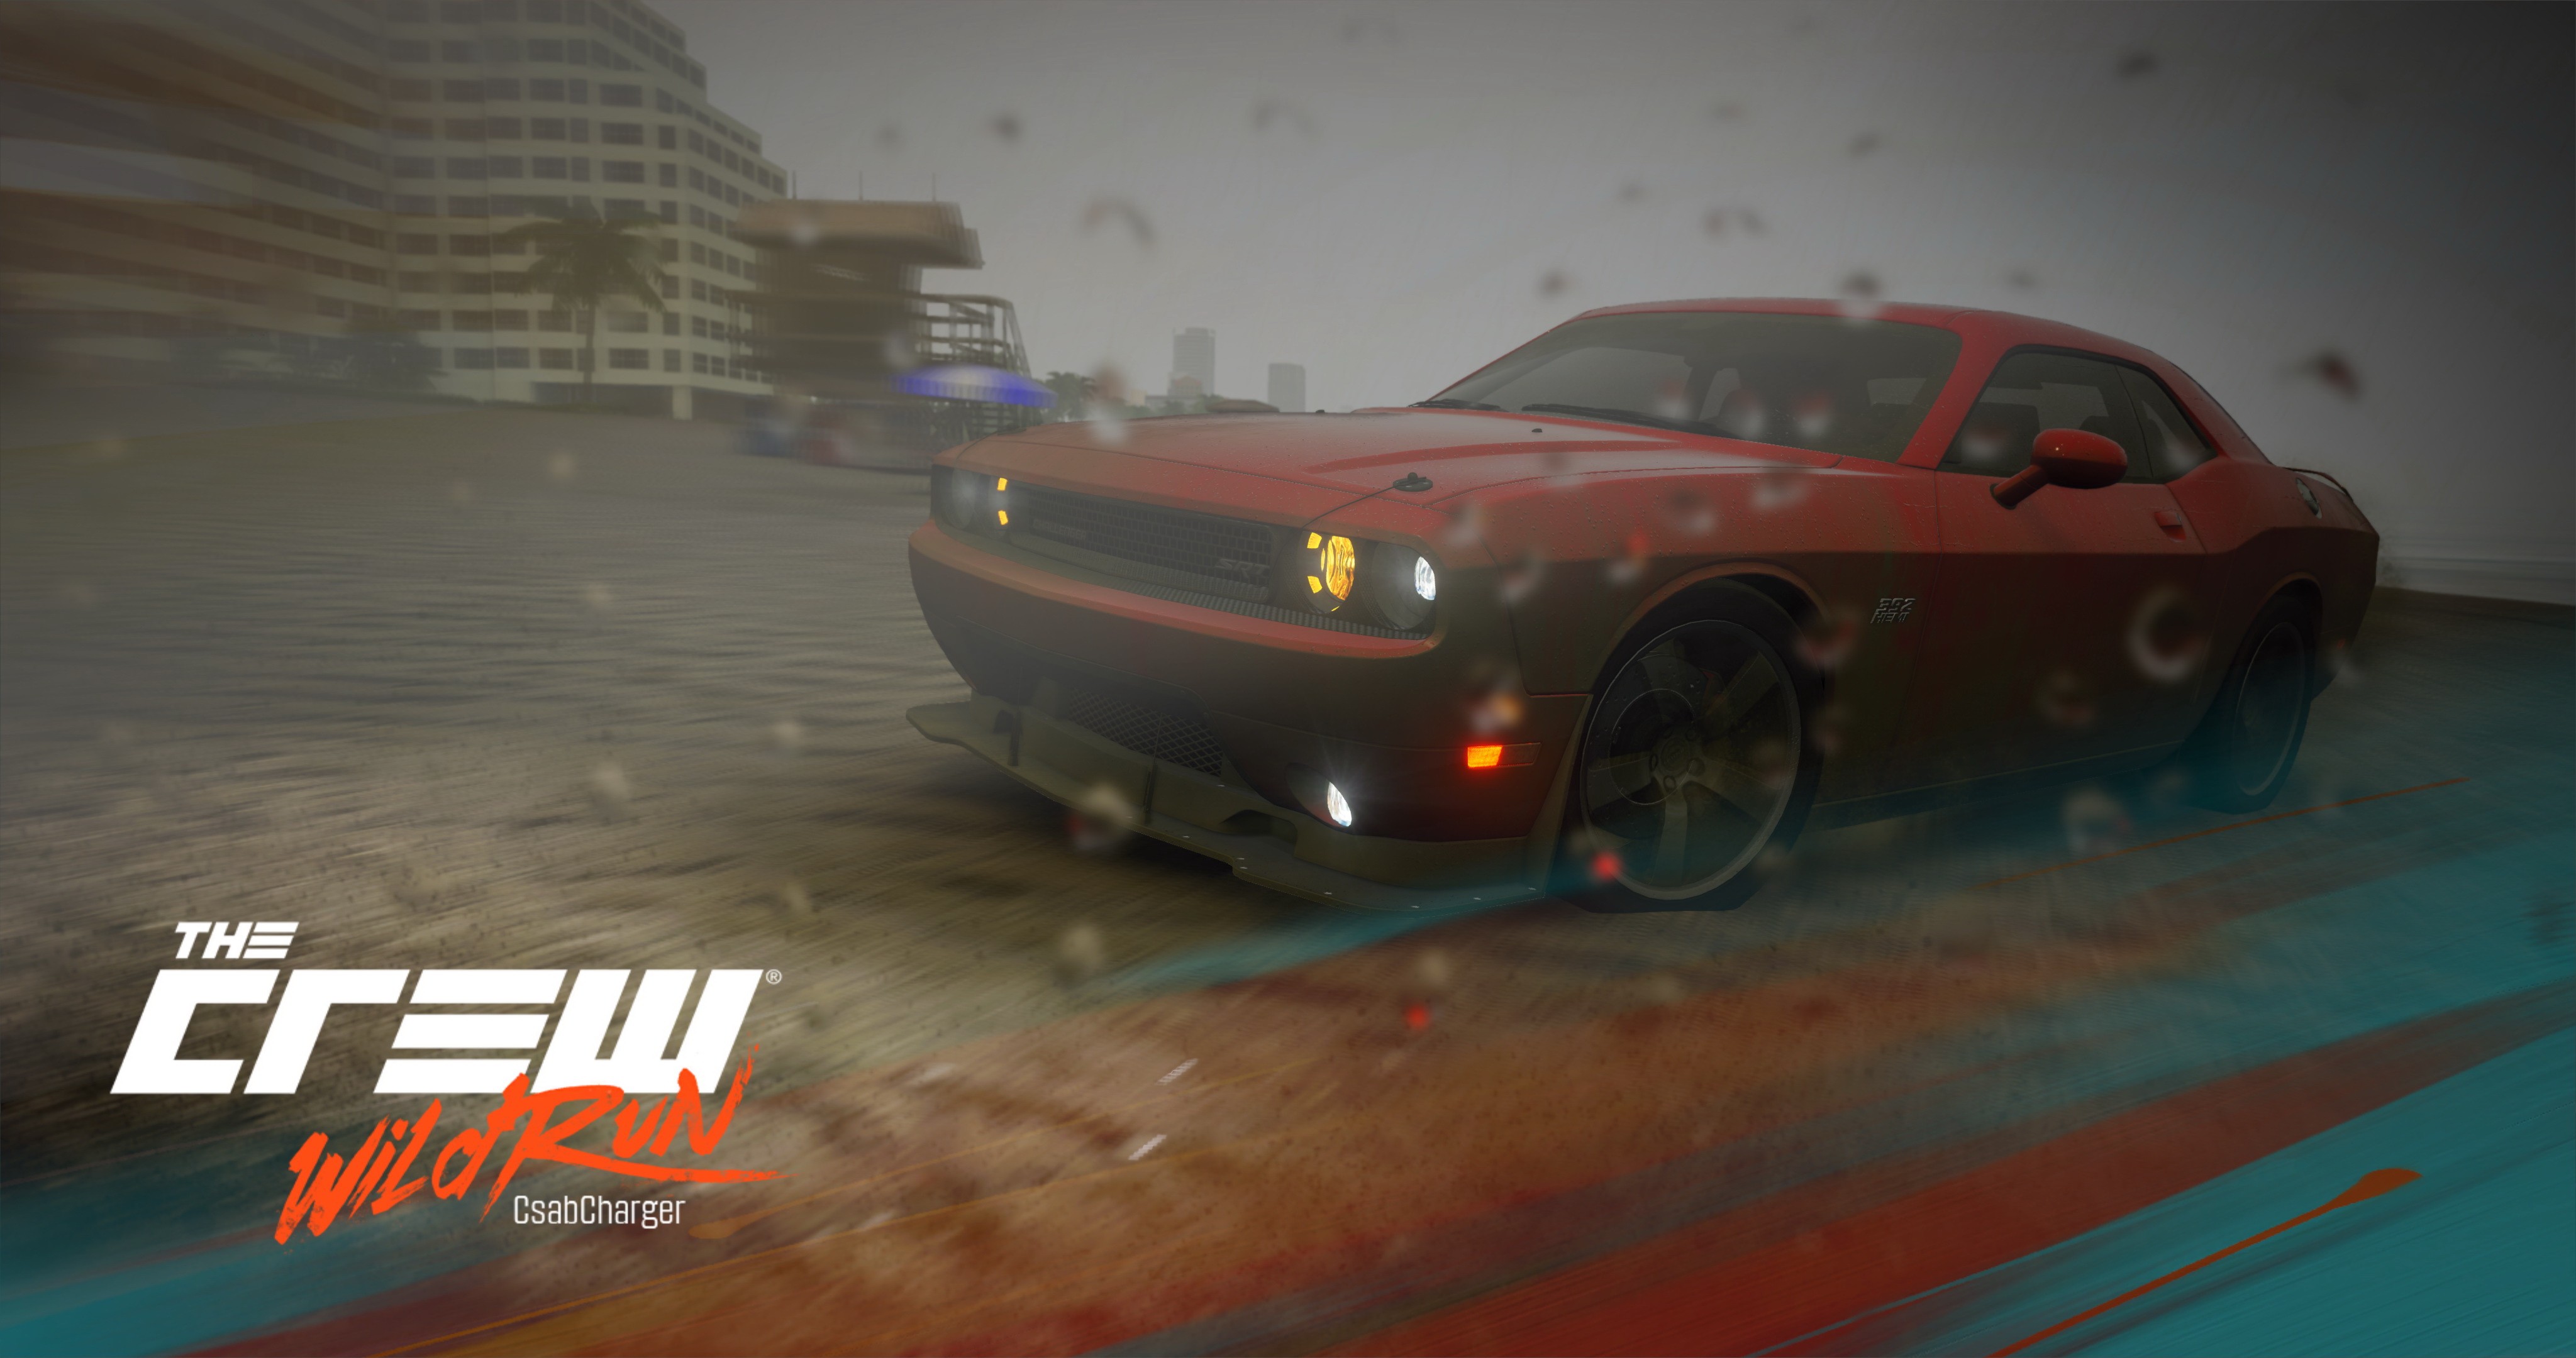 General 4096x2160 The Crew The Crew Wild Run Miami race cars Dodge Challenger video games Dodge muscle cars American cars Ubisoft V8 engine